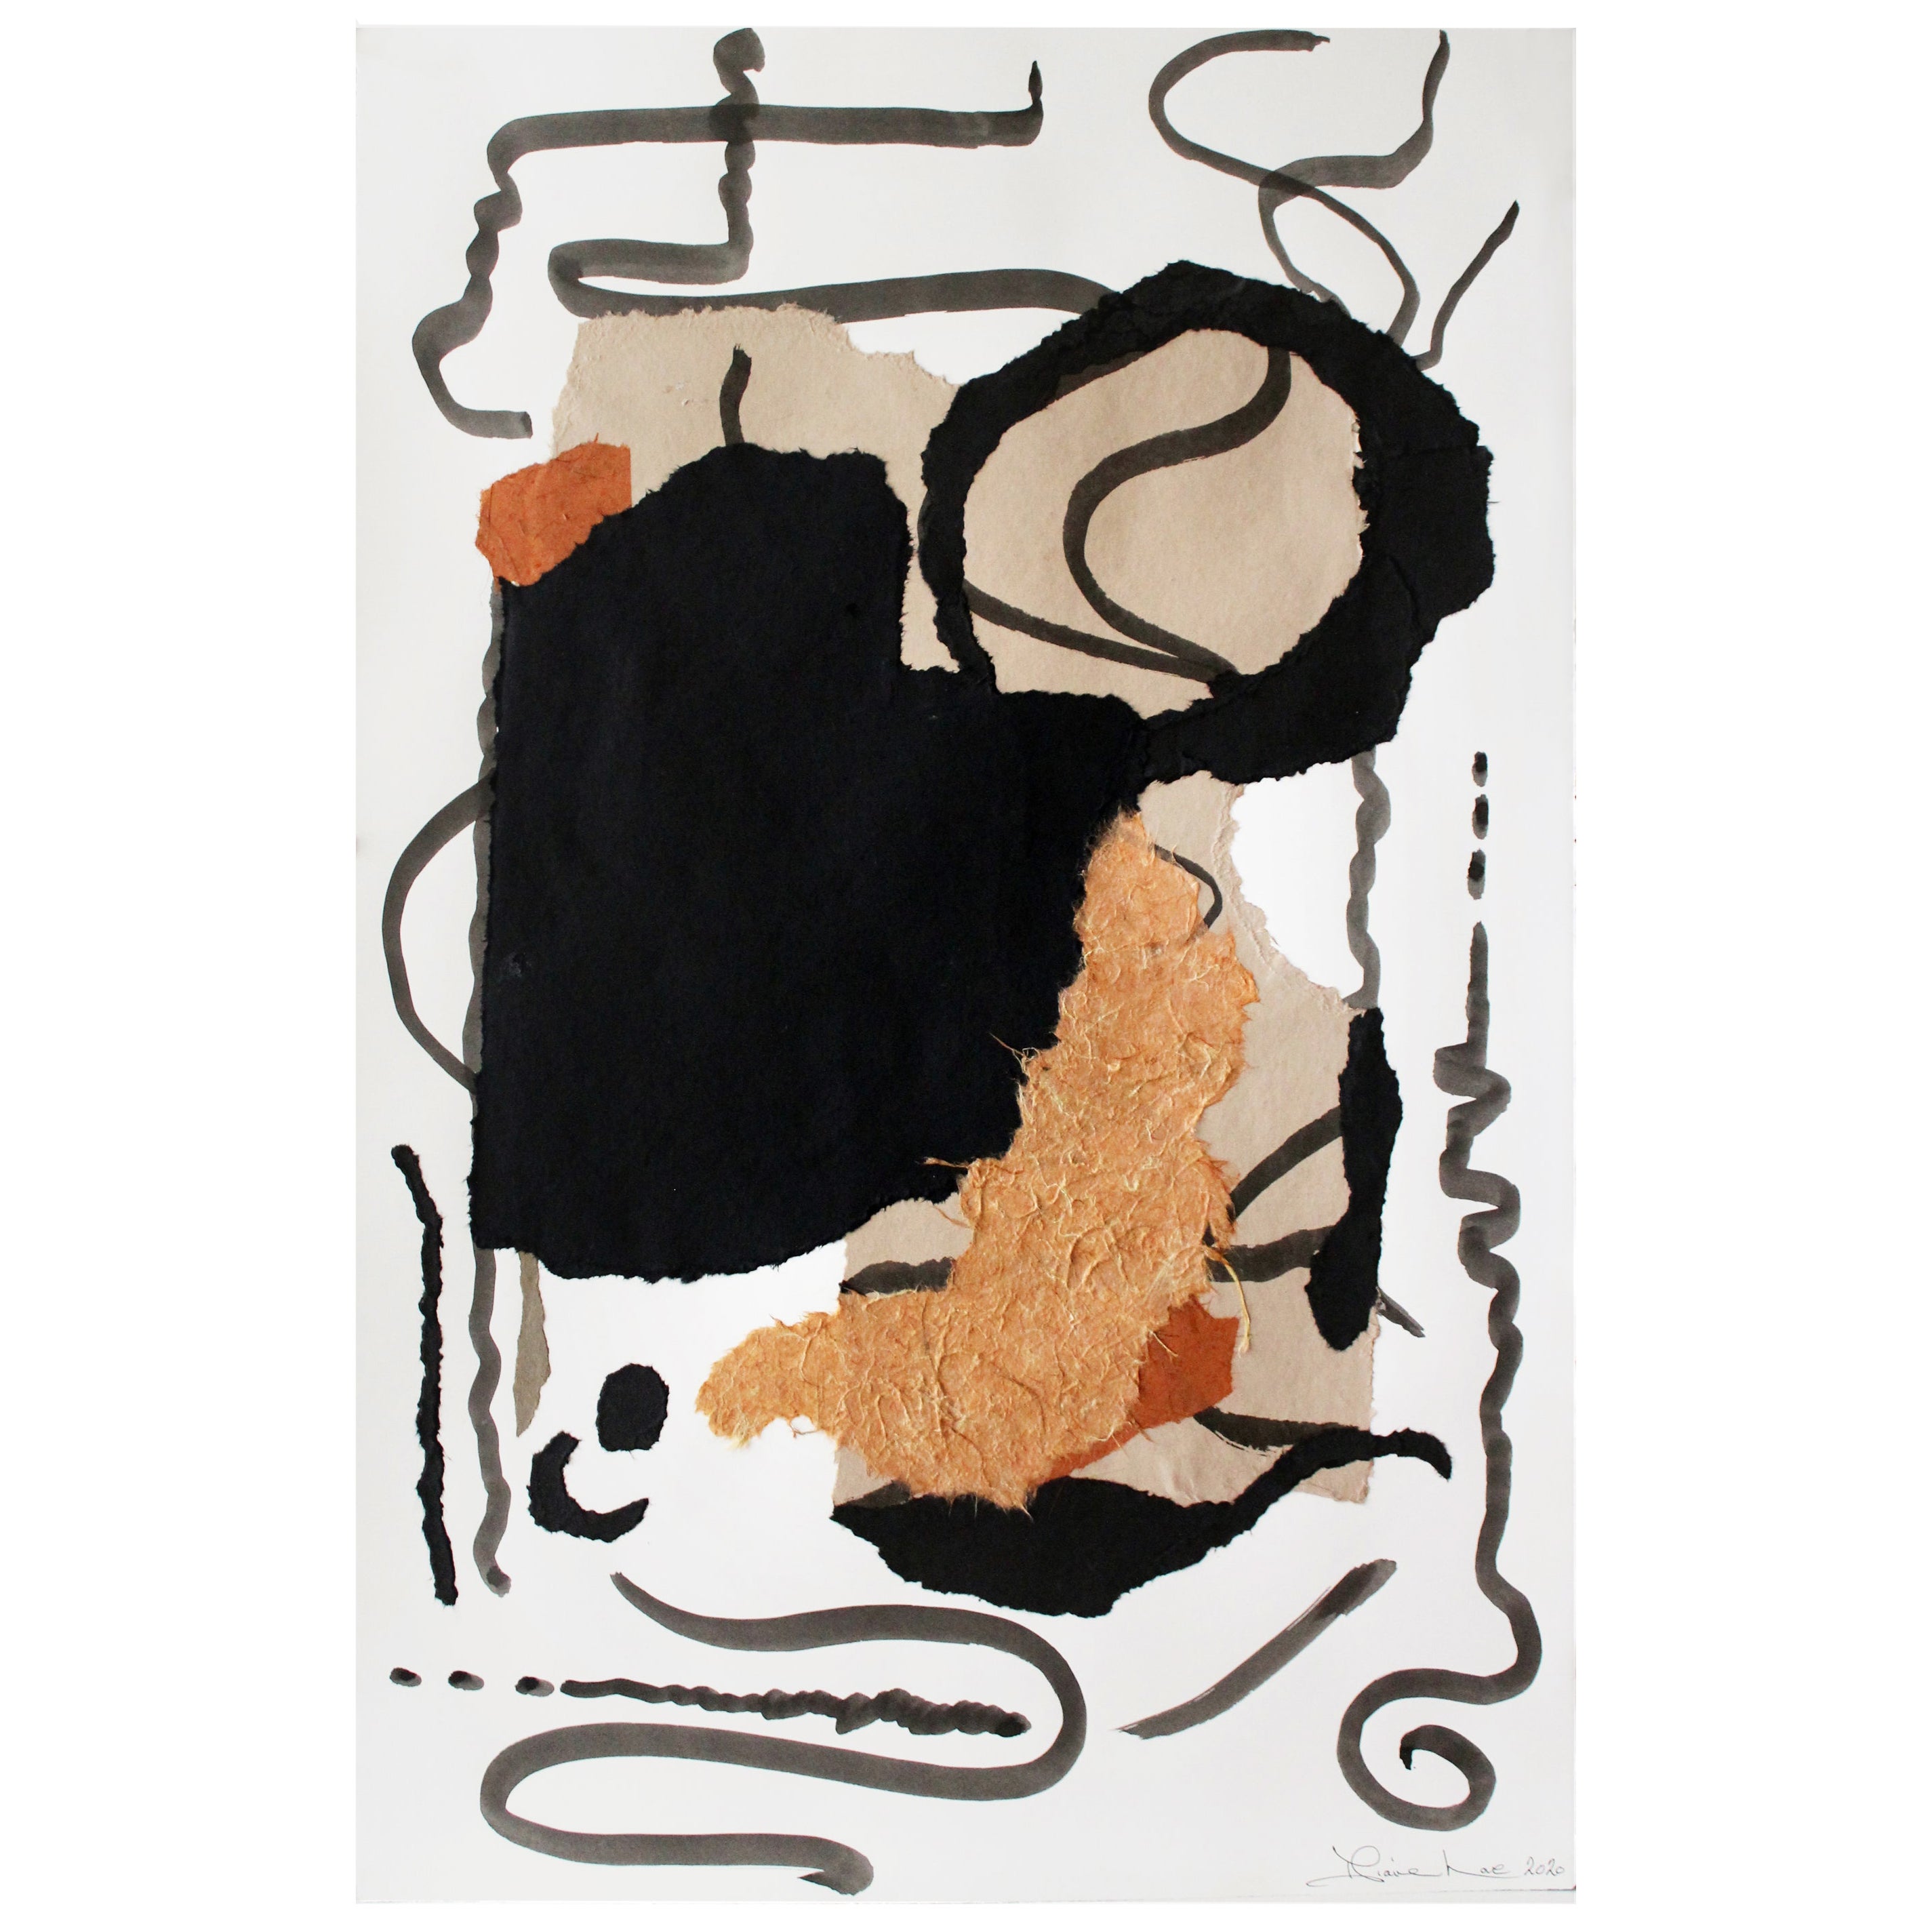 "Rhythm, " 2021 Large Framed Abstract Black, Rust and Tan Collage by Diane Love